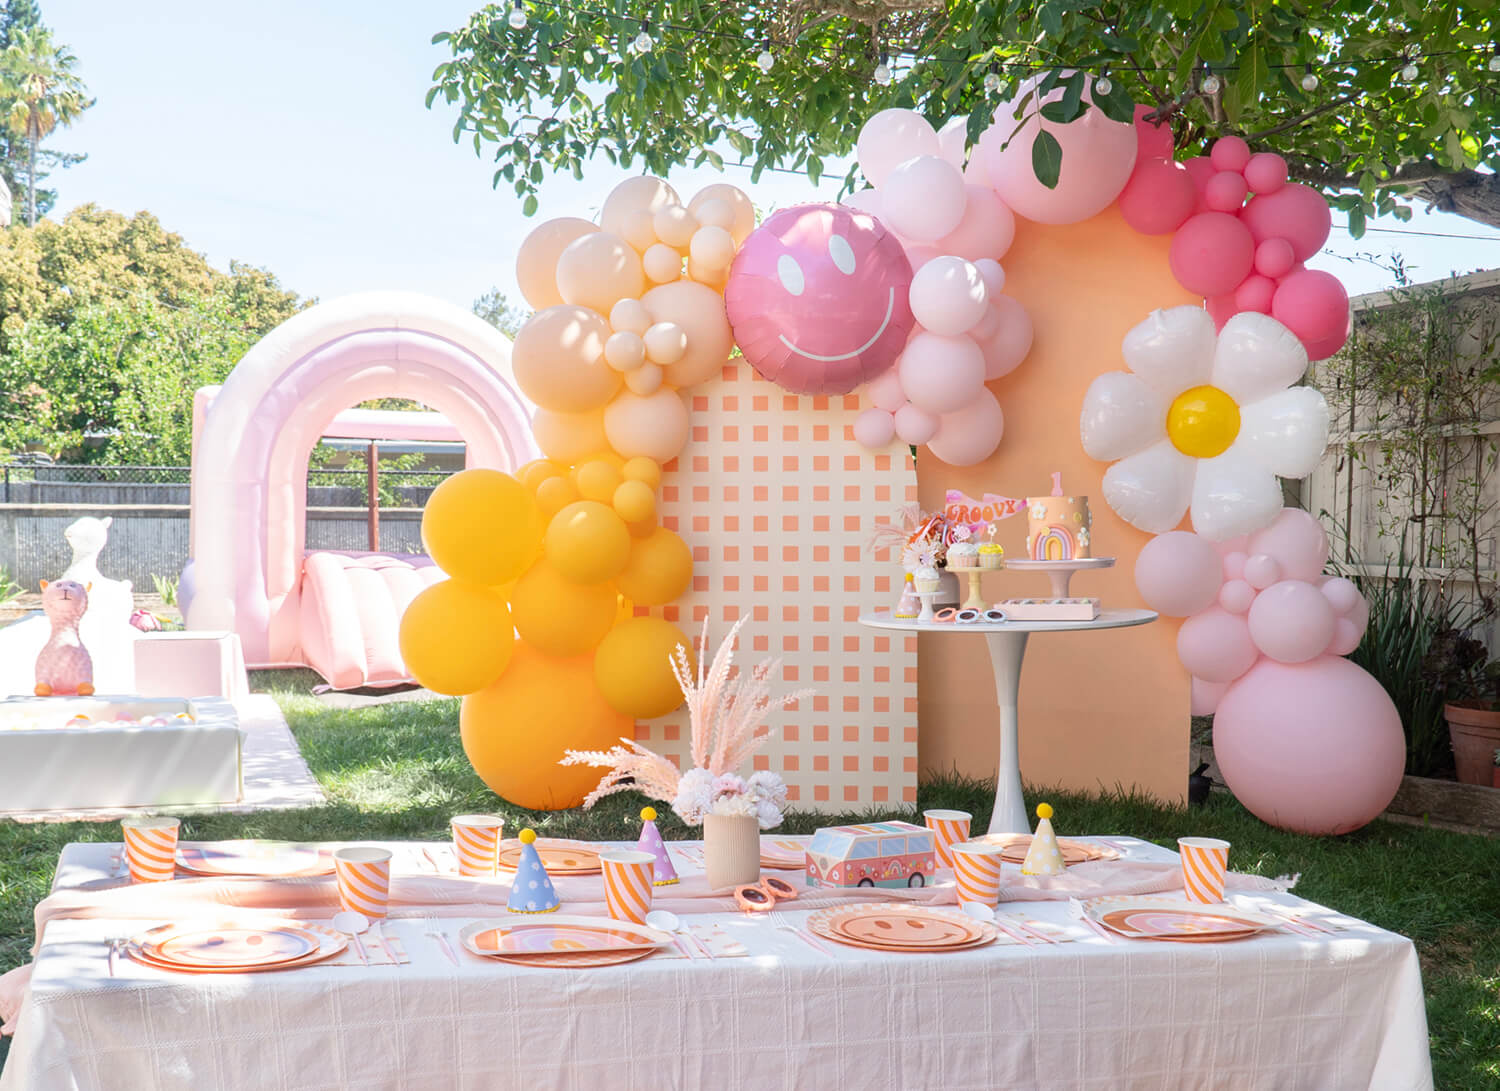 The Ultimate Guide To Throwing A Rainbow Party! Rainbow Ideas, Food, Decor,  Games & More!